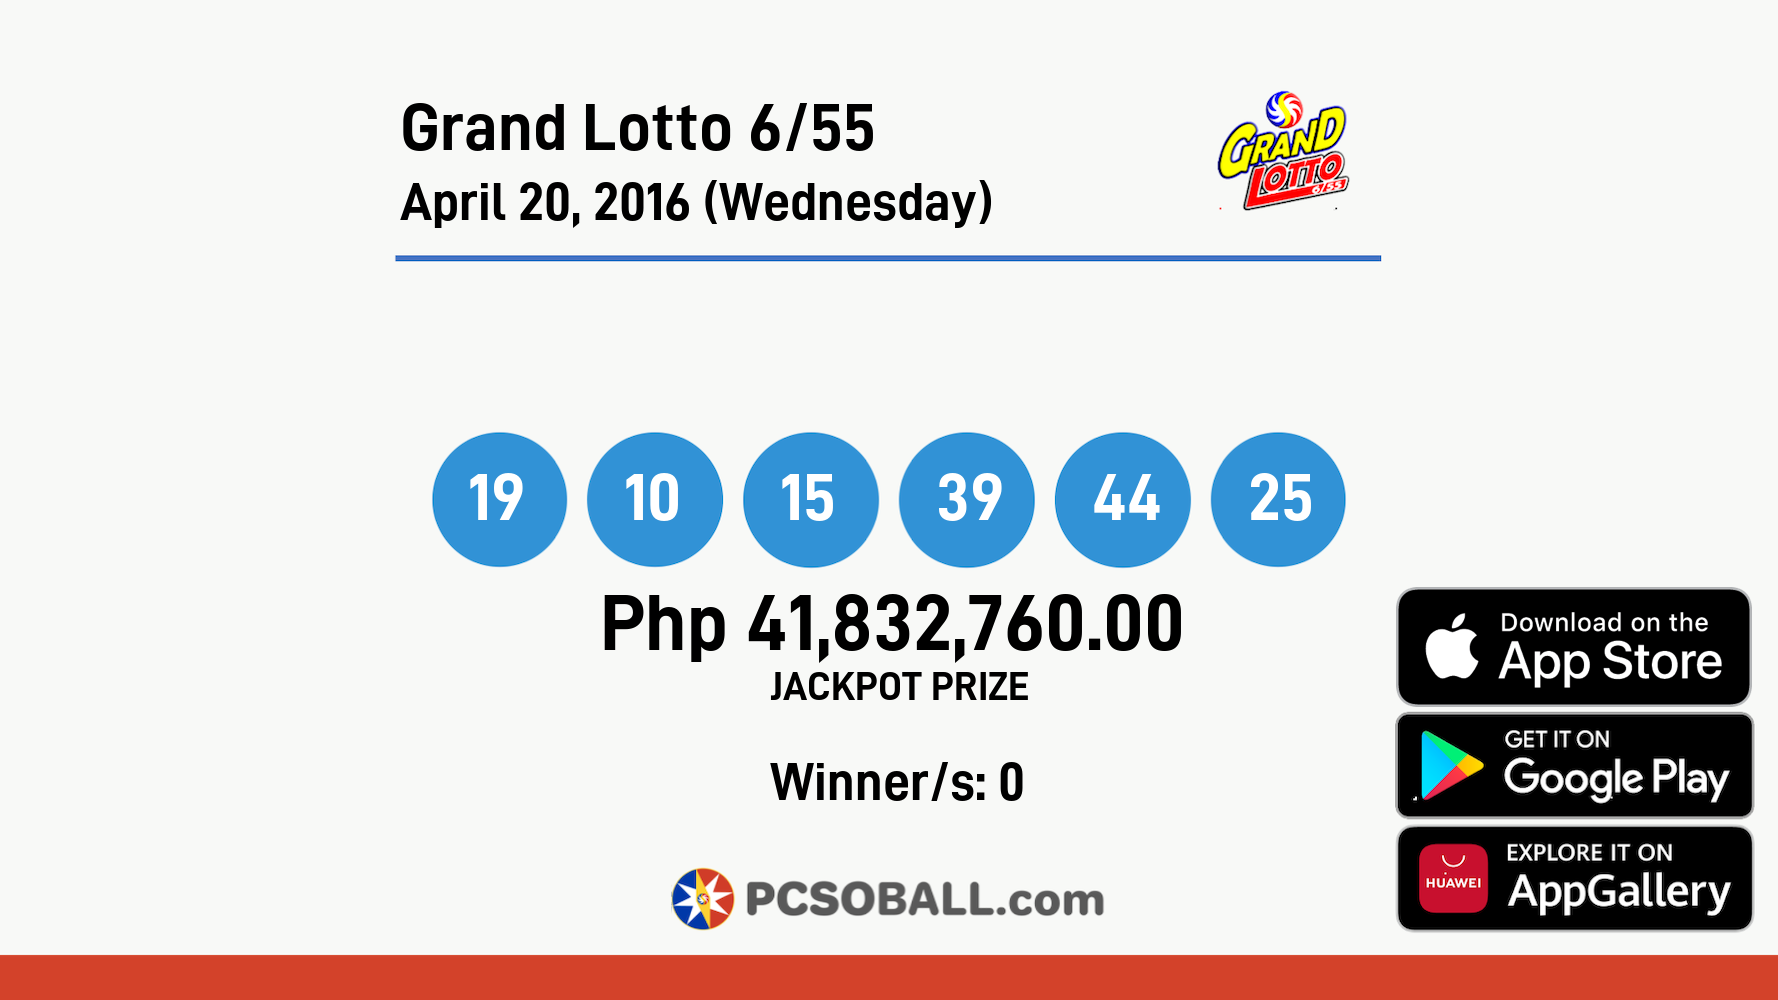 Grand Lotto 6/55 April 20, 2016 (Wednesday) Result